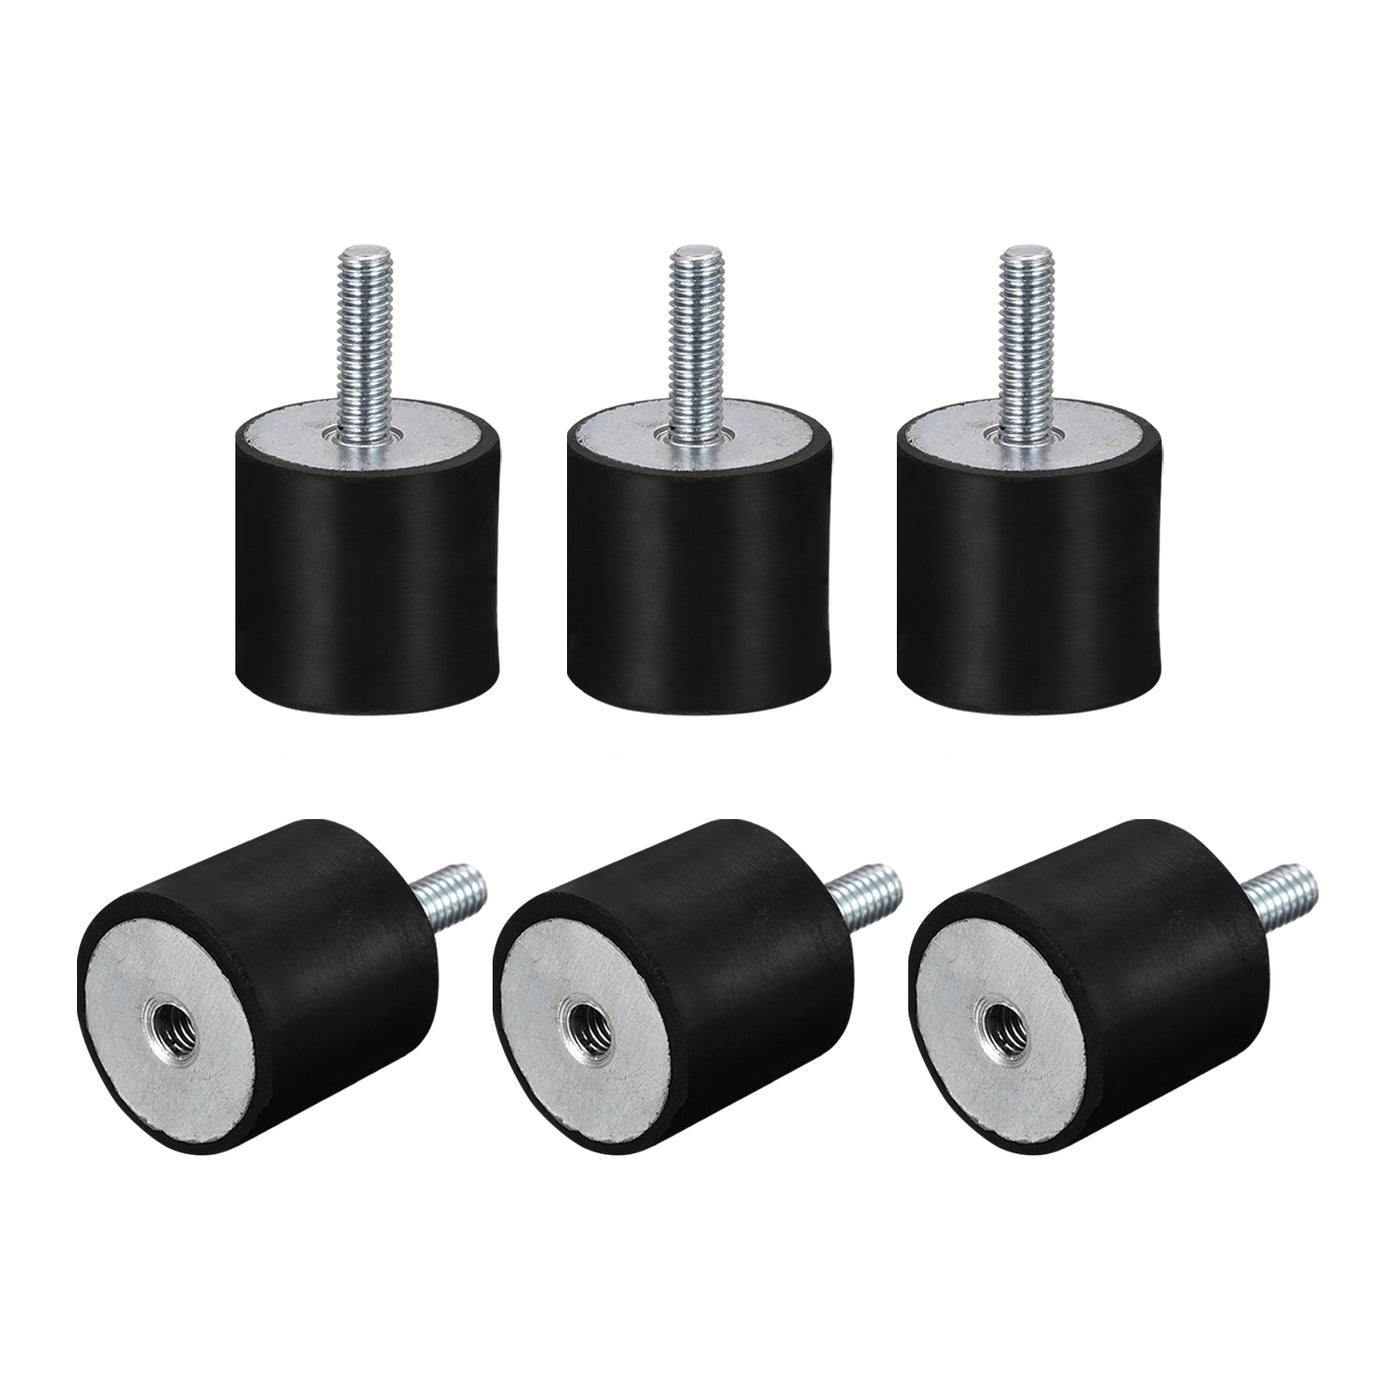 uxcell Uxcell Rubber Mount 6pcs M6 Male/Female Vibration Isolator Shock Absorber, D20mmxH15mm